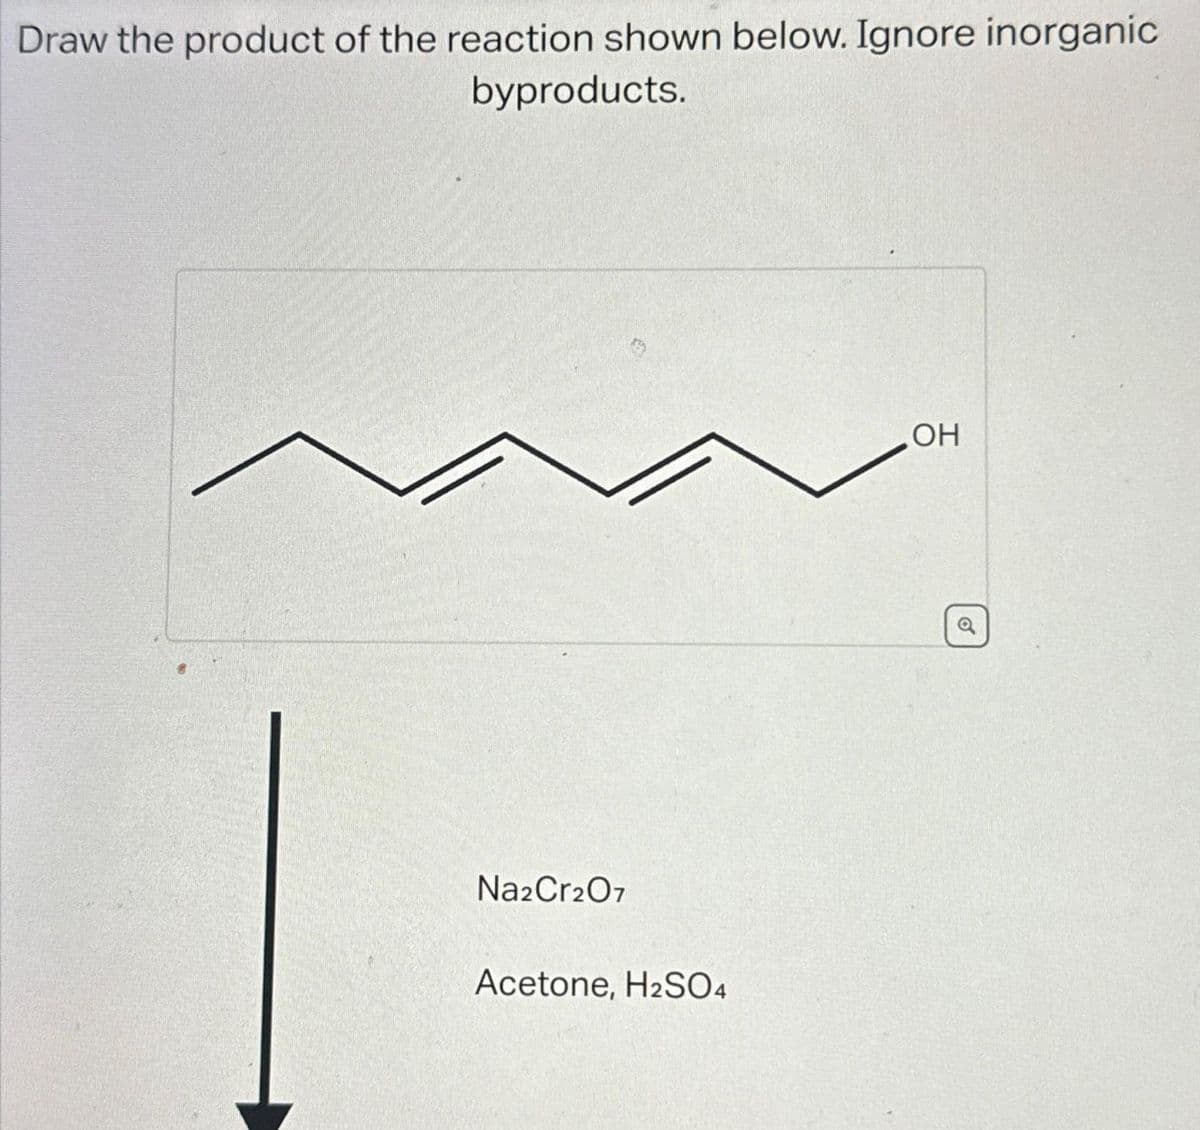 Draw the product of the reaction shown below. Ignore inorganic
byproducts.
Na2Cr2O7
Acetone, H₂SO4
OH
o